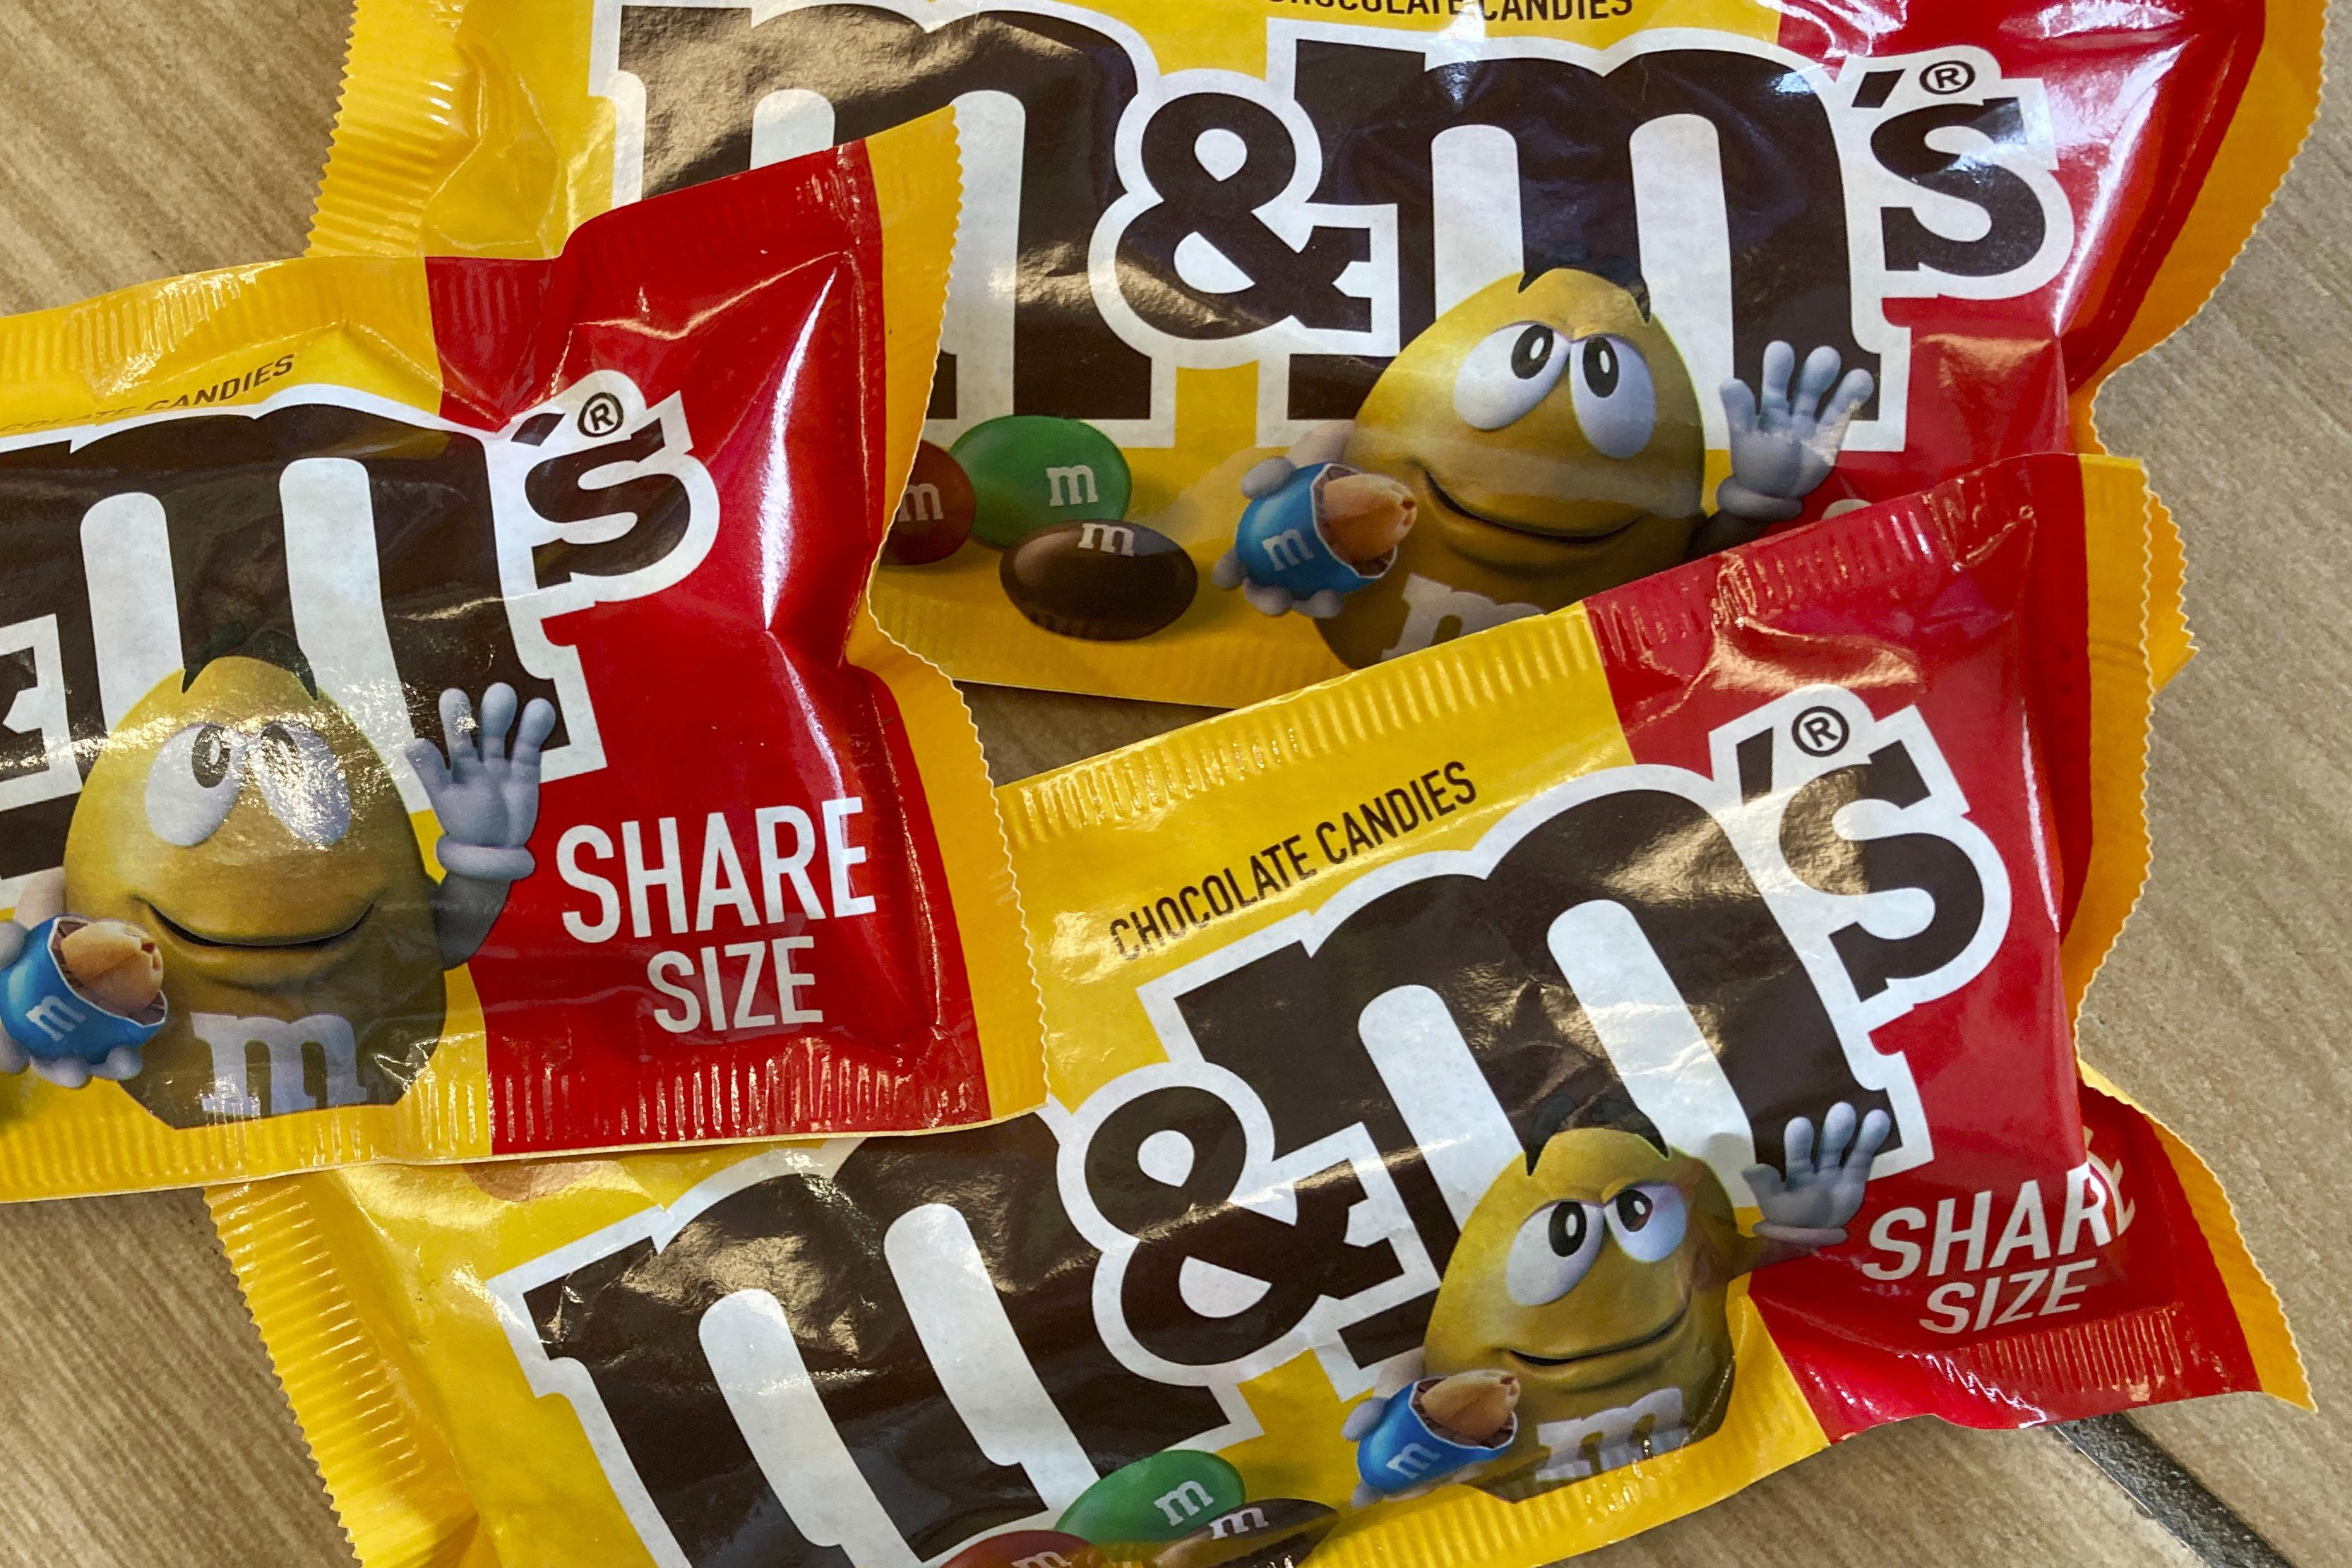 M&M's Spokescandies are Taking an Indefinite Pause